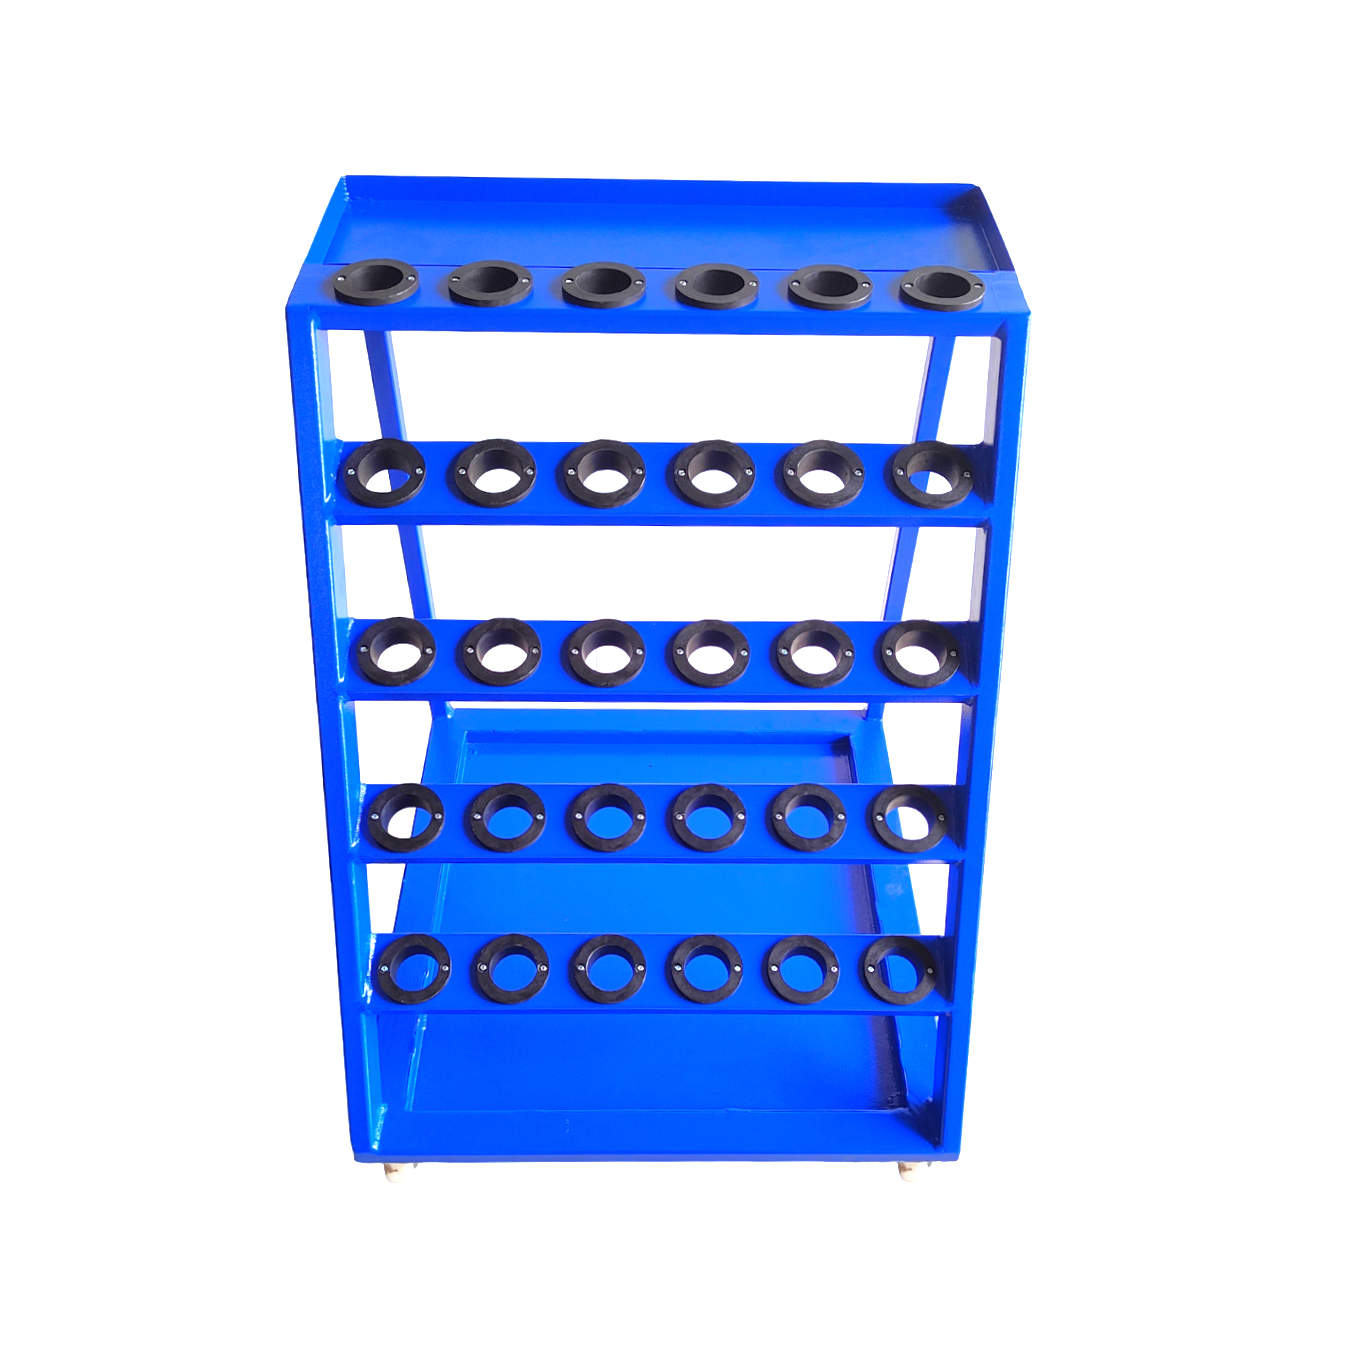 Technocart Tool Holder Trolley for HSK-63 with 5 Racks & 30 Pockets